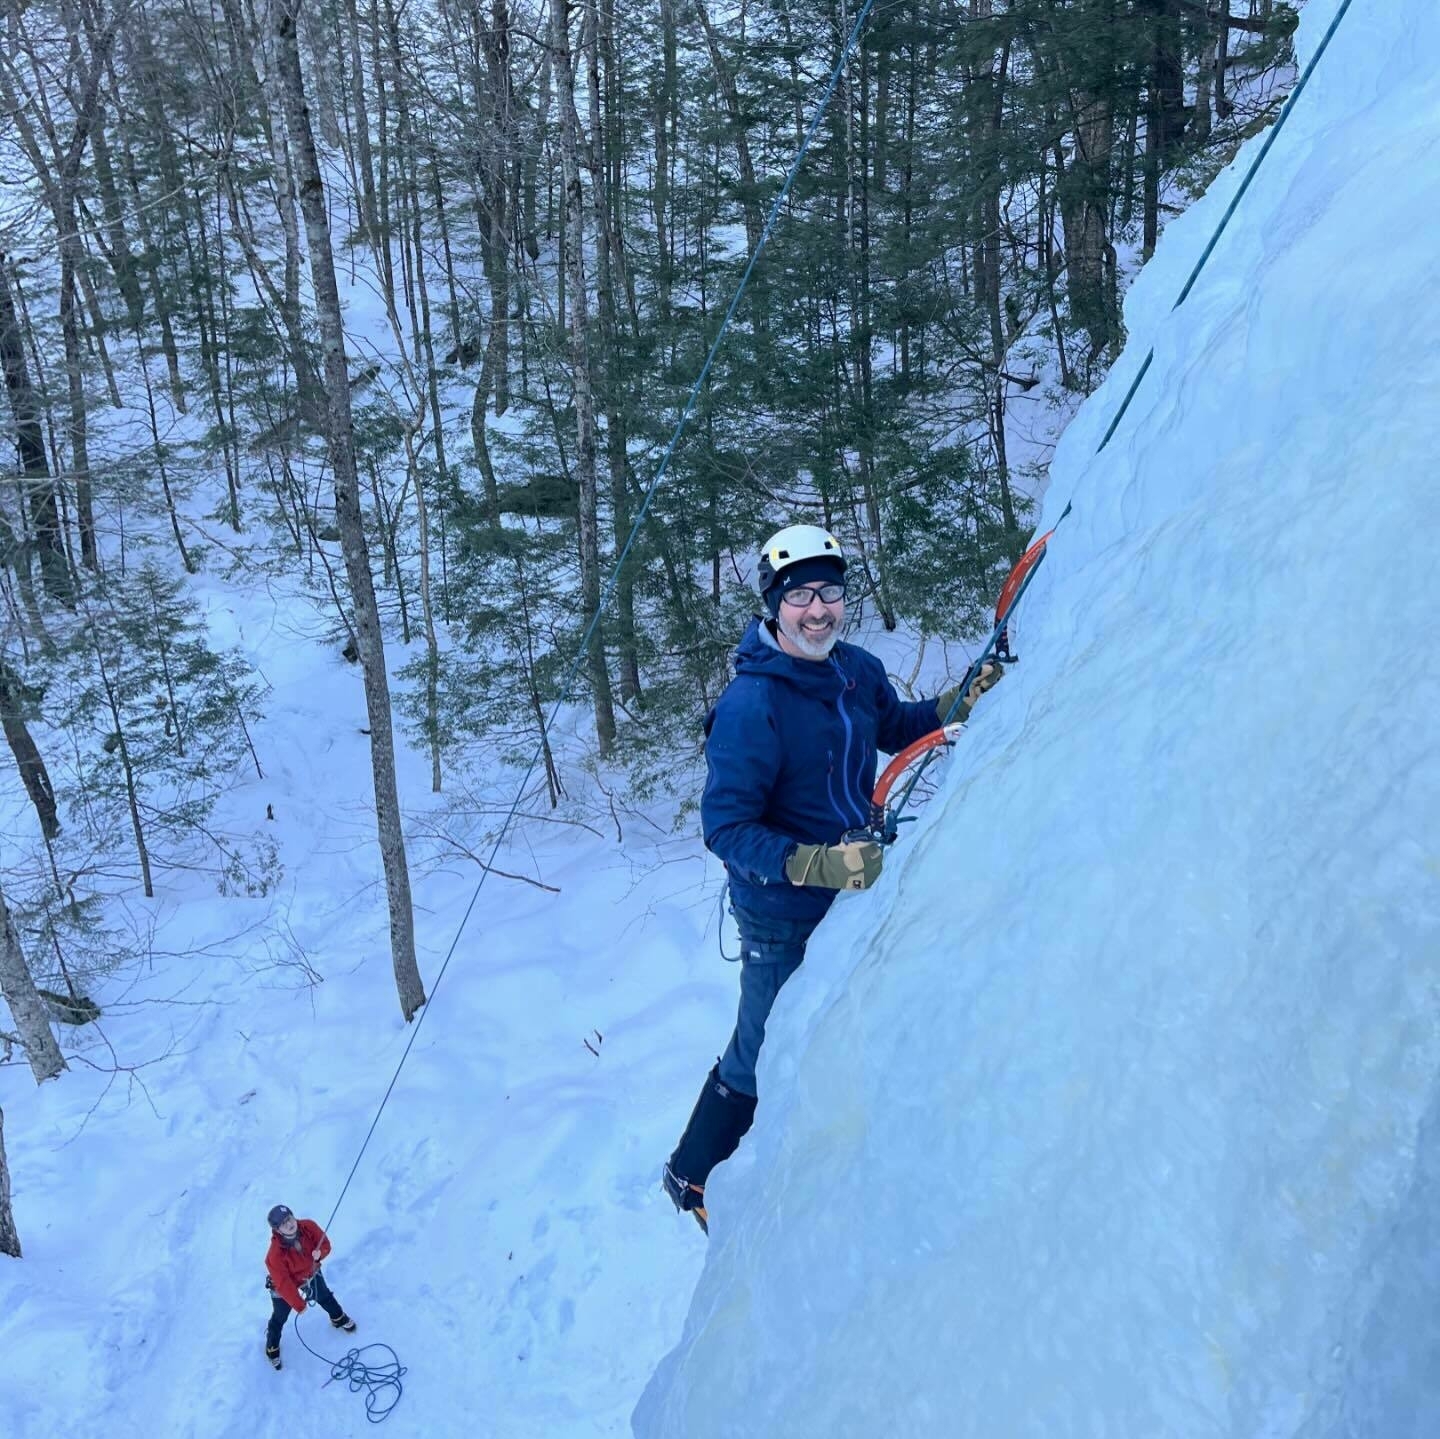 A person is ice climbing a frozen slope while another person stands below on snow-covered ground, surrounded by a forest of bare trees. The climber is smiling and secured by ropes.